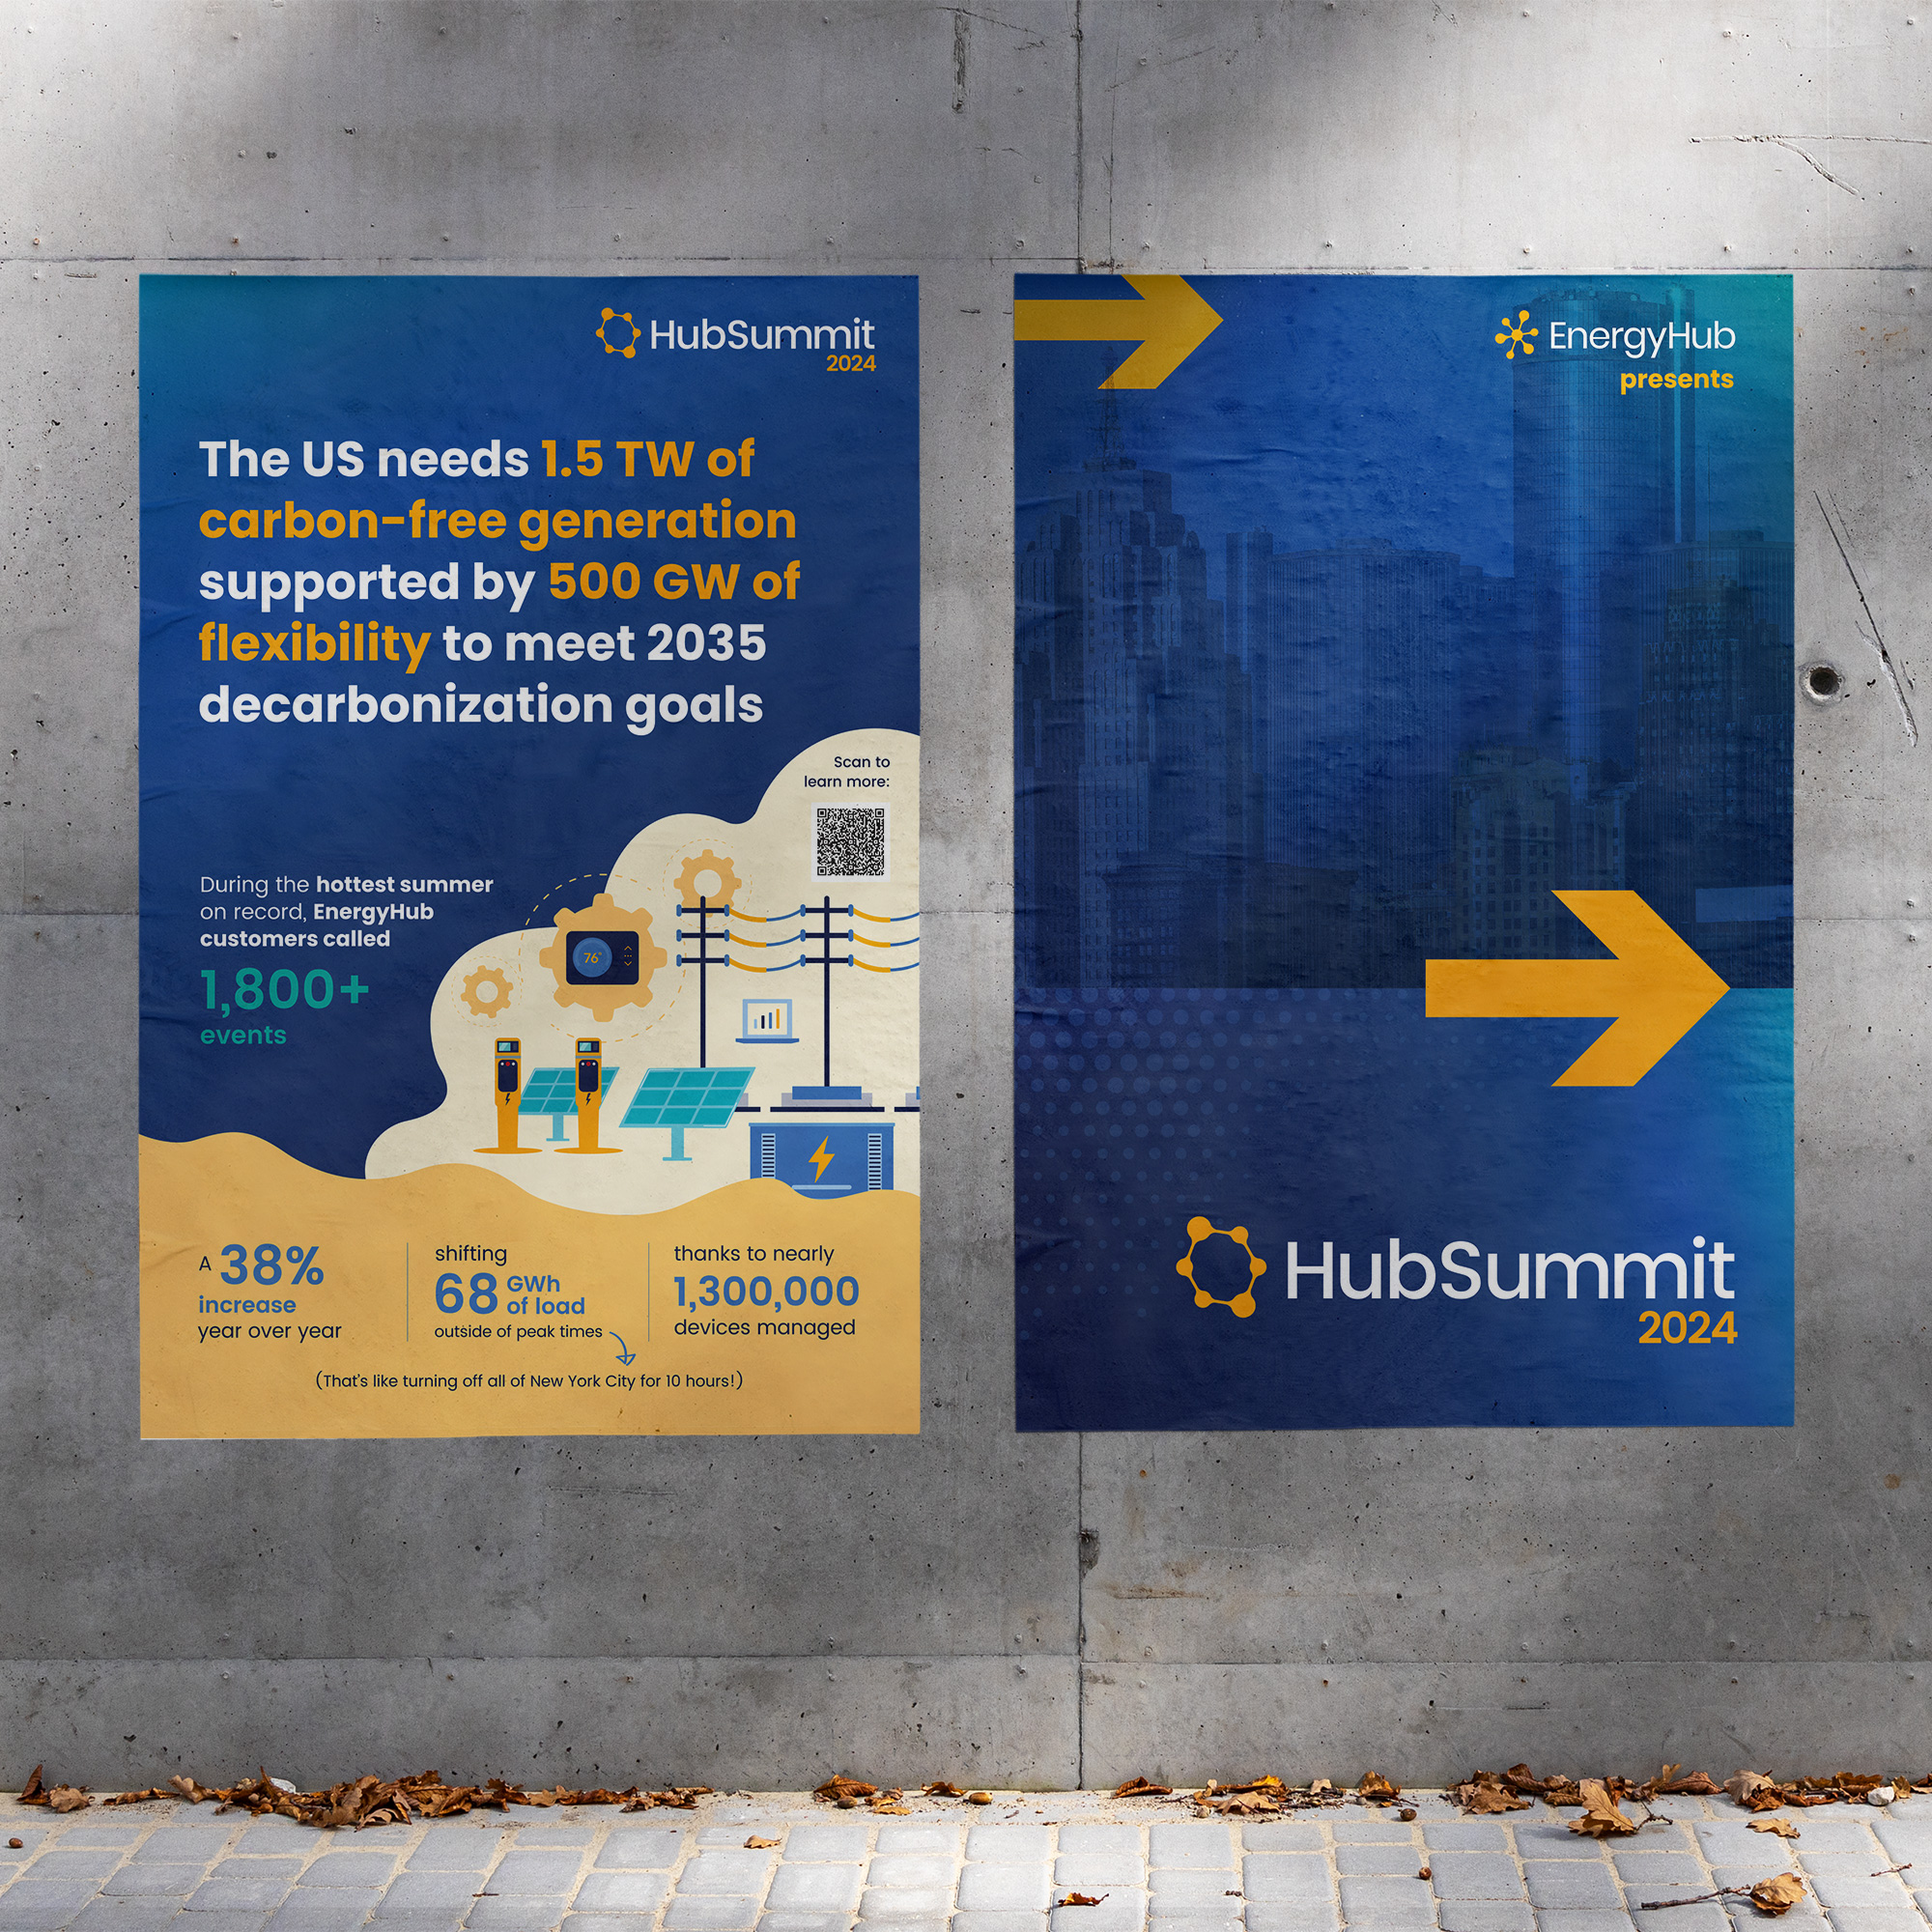 EnergyHub HubSummit 2024 posters mockup depicted in a real-life setting with two posters on a cement wall. The left factoid poster features text highlighting the US's need for 1.5 TW of carbon-free generation and 500 GW of flexibility to meet 2035 decarbonization goals, along with additional statistics about EnergyHub's achievements. The right poster displays the HubSummit 2024 logo and a large arrow pointing right.